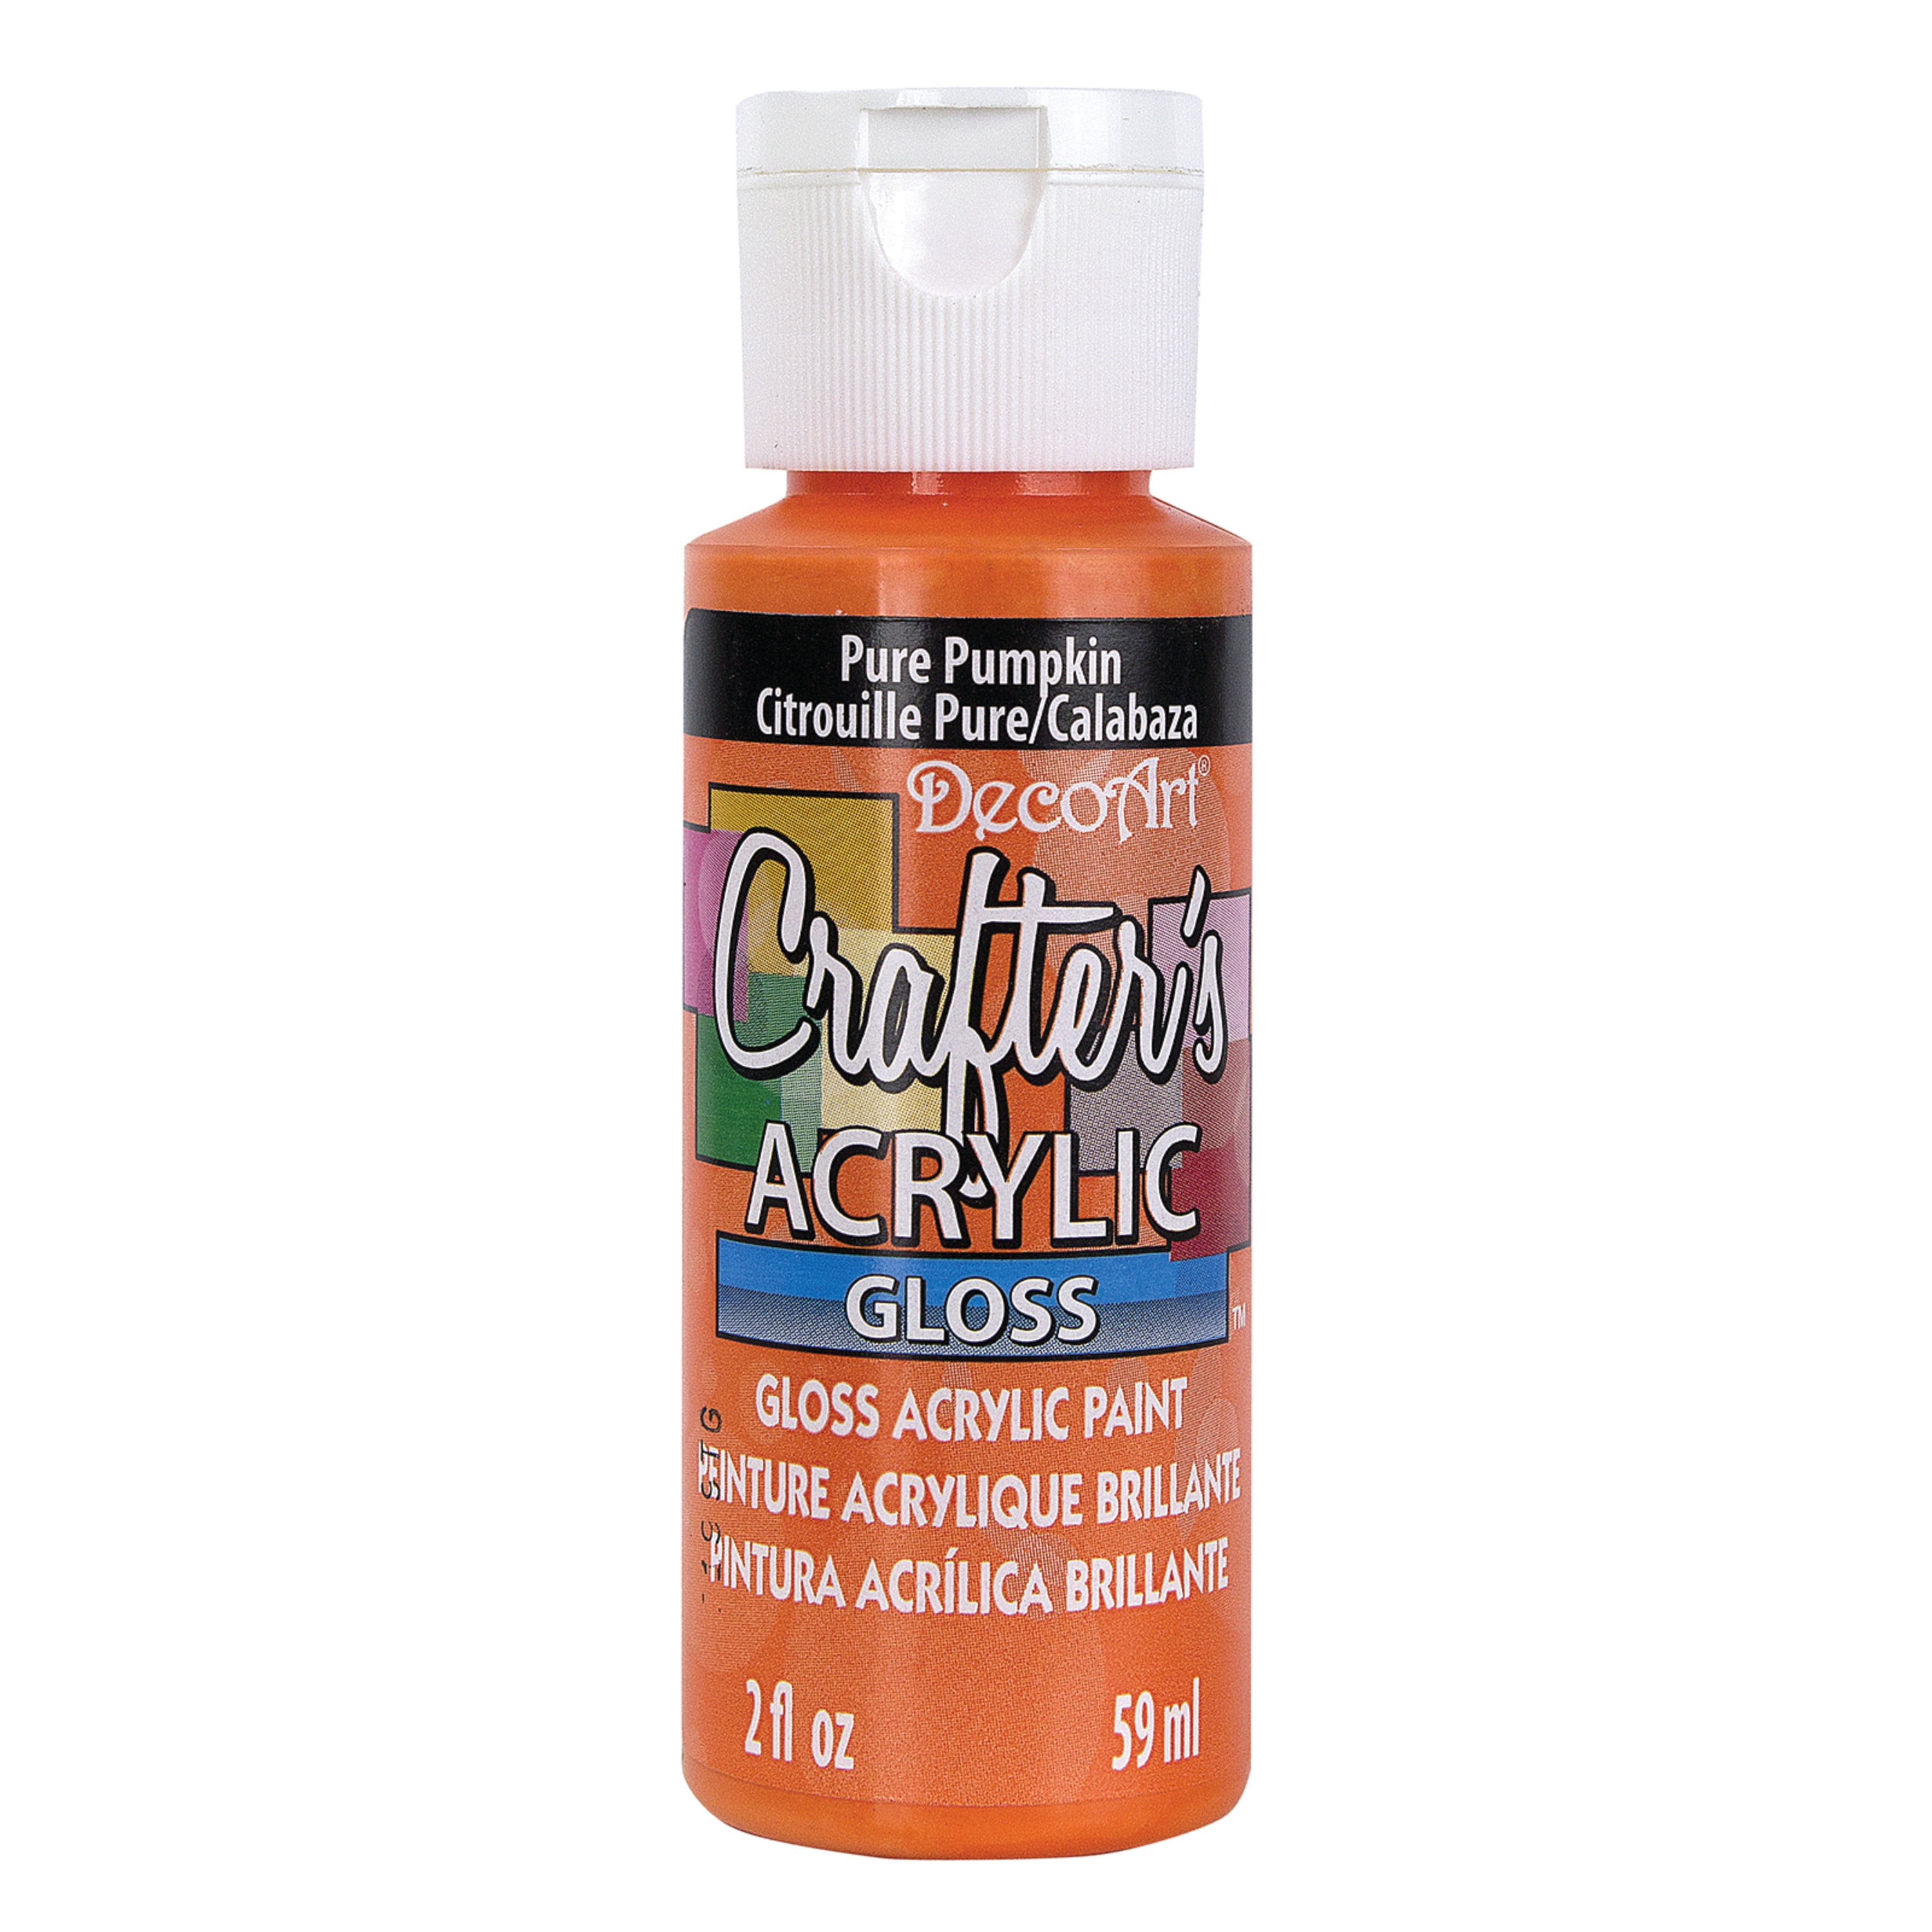 Crafter's Acrylic All Purpose Paint 2oz Pure Pumpkin.